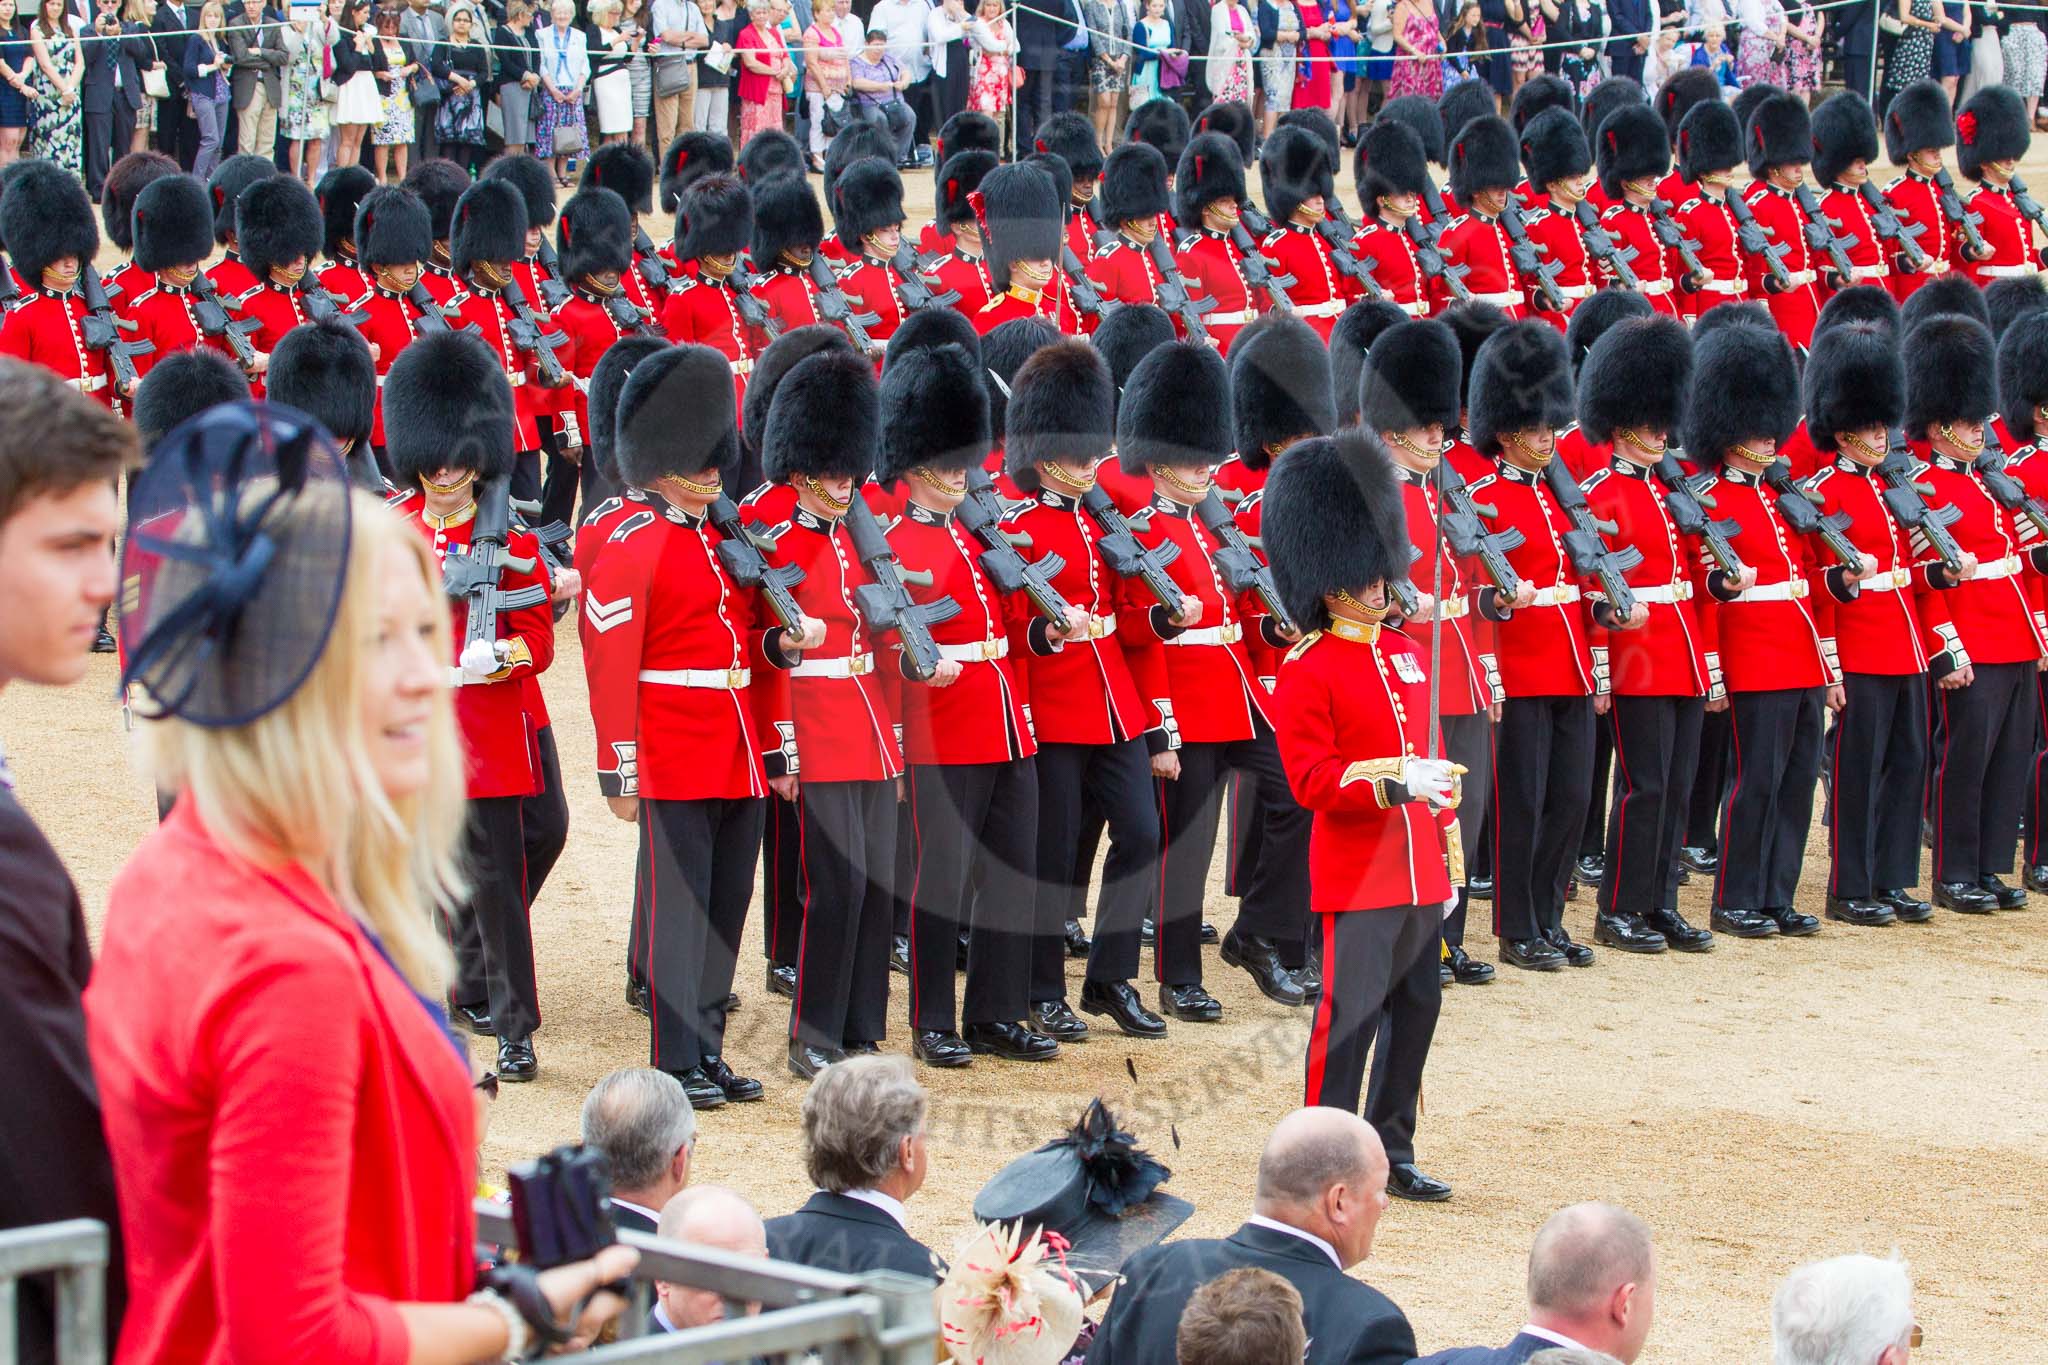 Trooping the Colour 2014.
Horse Guards Parade, Westminster,
London SW1A,

United Kingdom,
on 14 June 2014 at 11:38, image #641